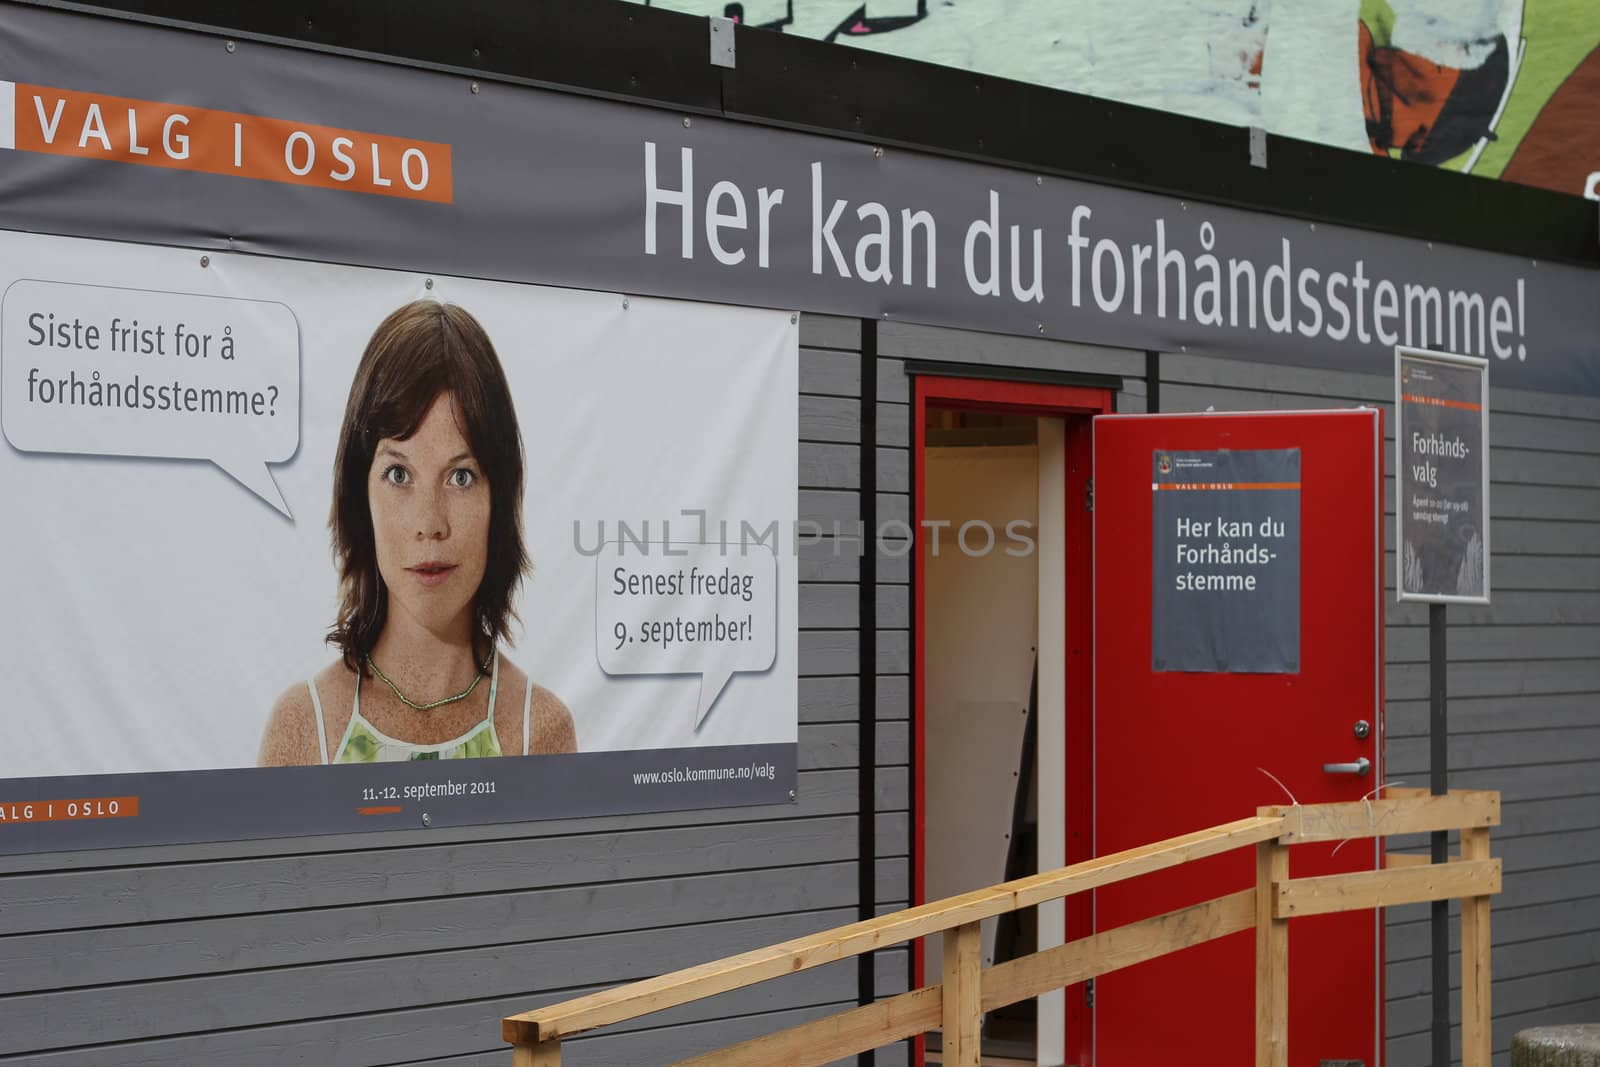 A polling station during the norwegian election campaign 2011.